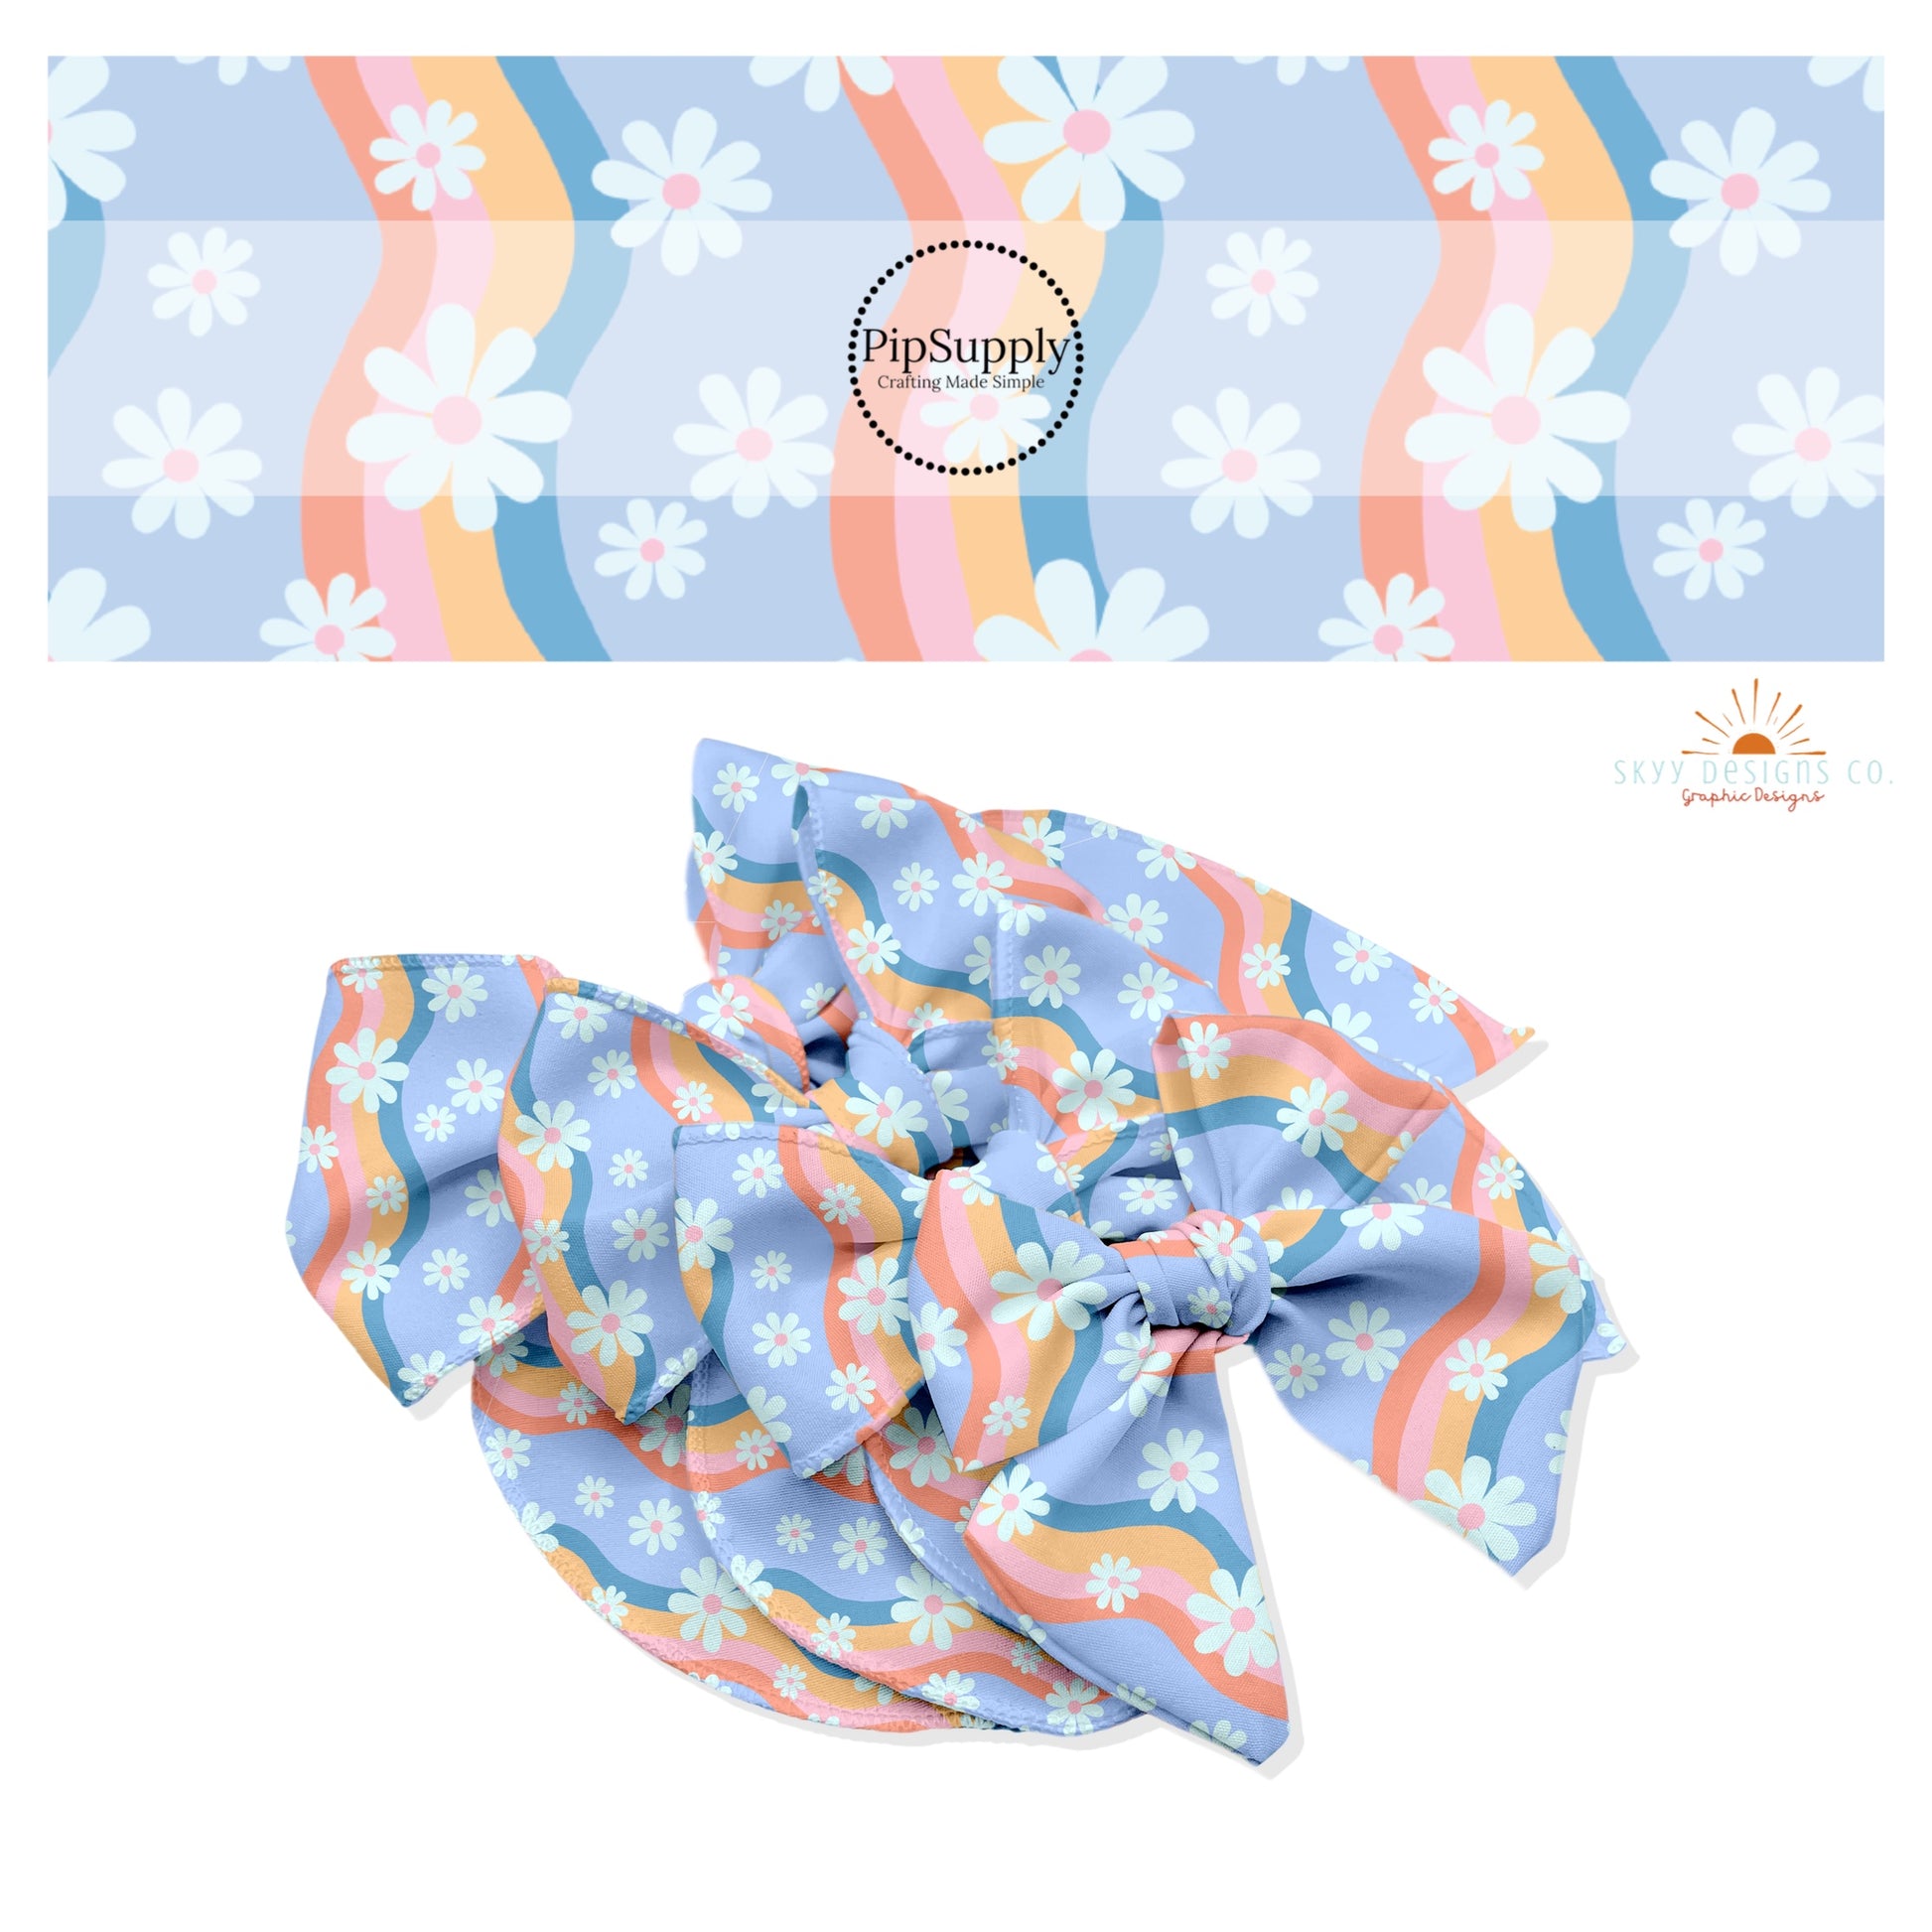 Wavy pastel rainbow stripes with white daisies with various sizes on periwinkle hair bow strips.